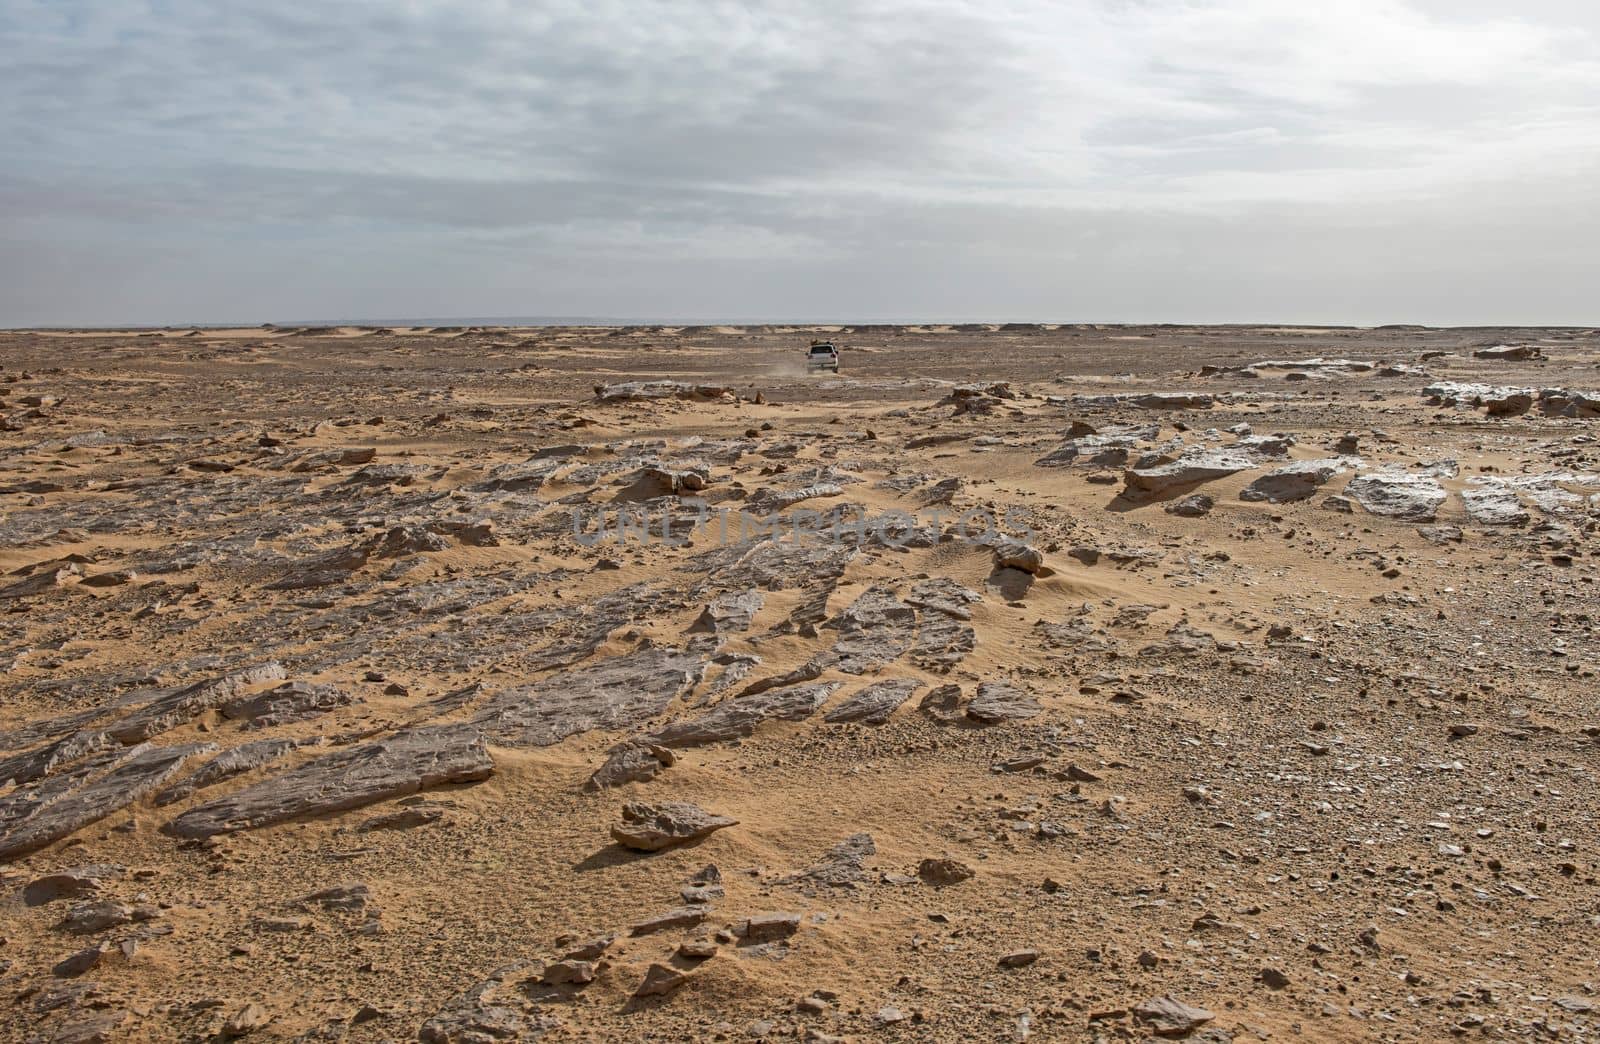 Landscape scenic view of desolate barren western desert in Egypt with rocky vista and off-road vehicle